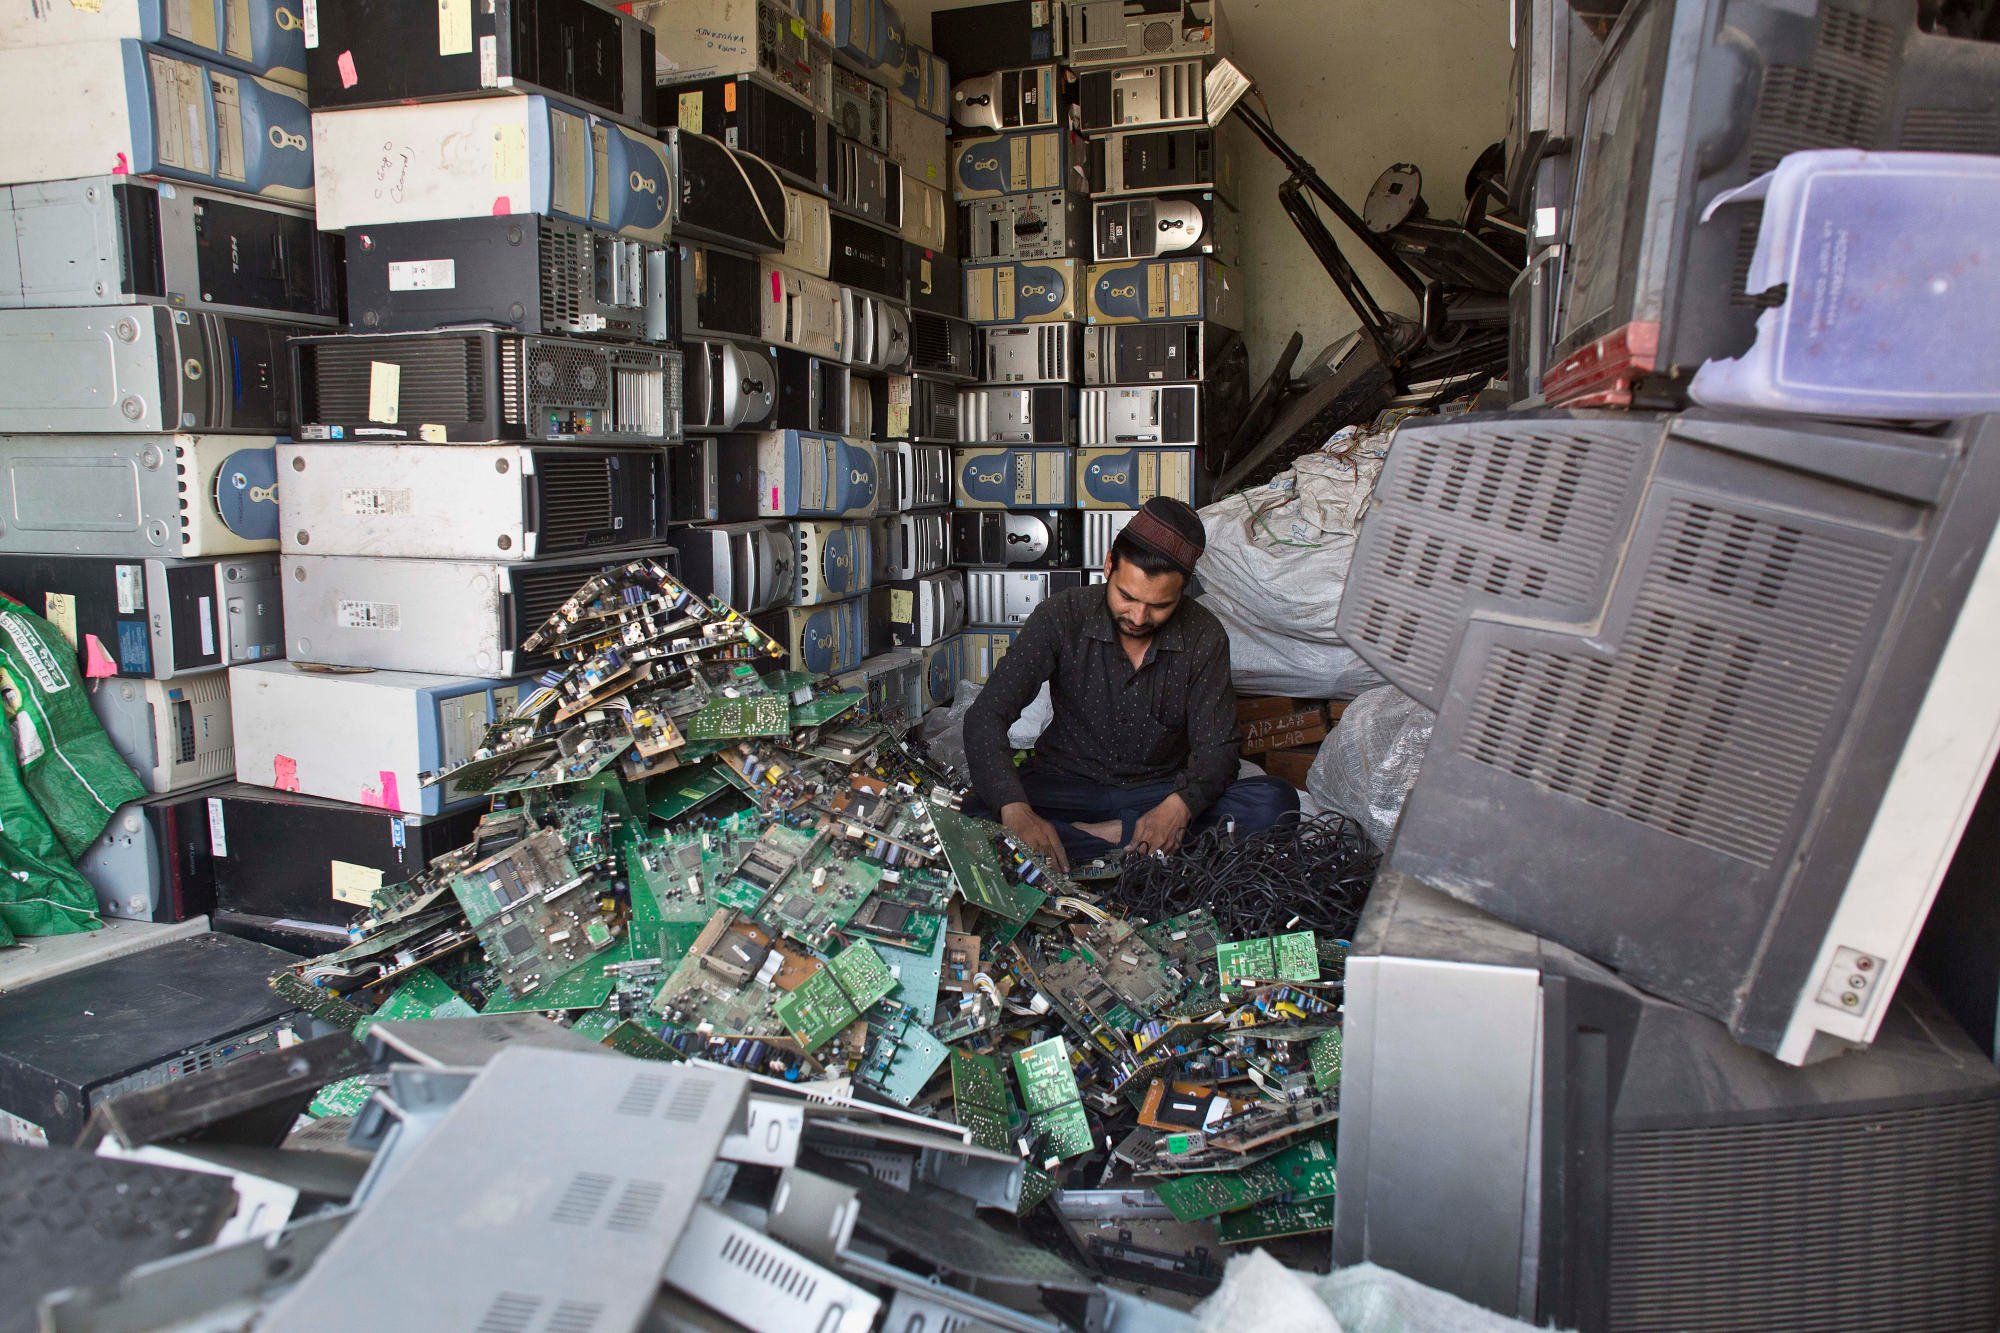 An Indian man works at an electronic waste recycling shop in Gauhati, Assam state, in 2017. Analysts say the “nerve centres” of many supply chains still remain in China. Photo: AP